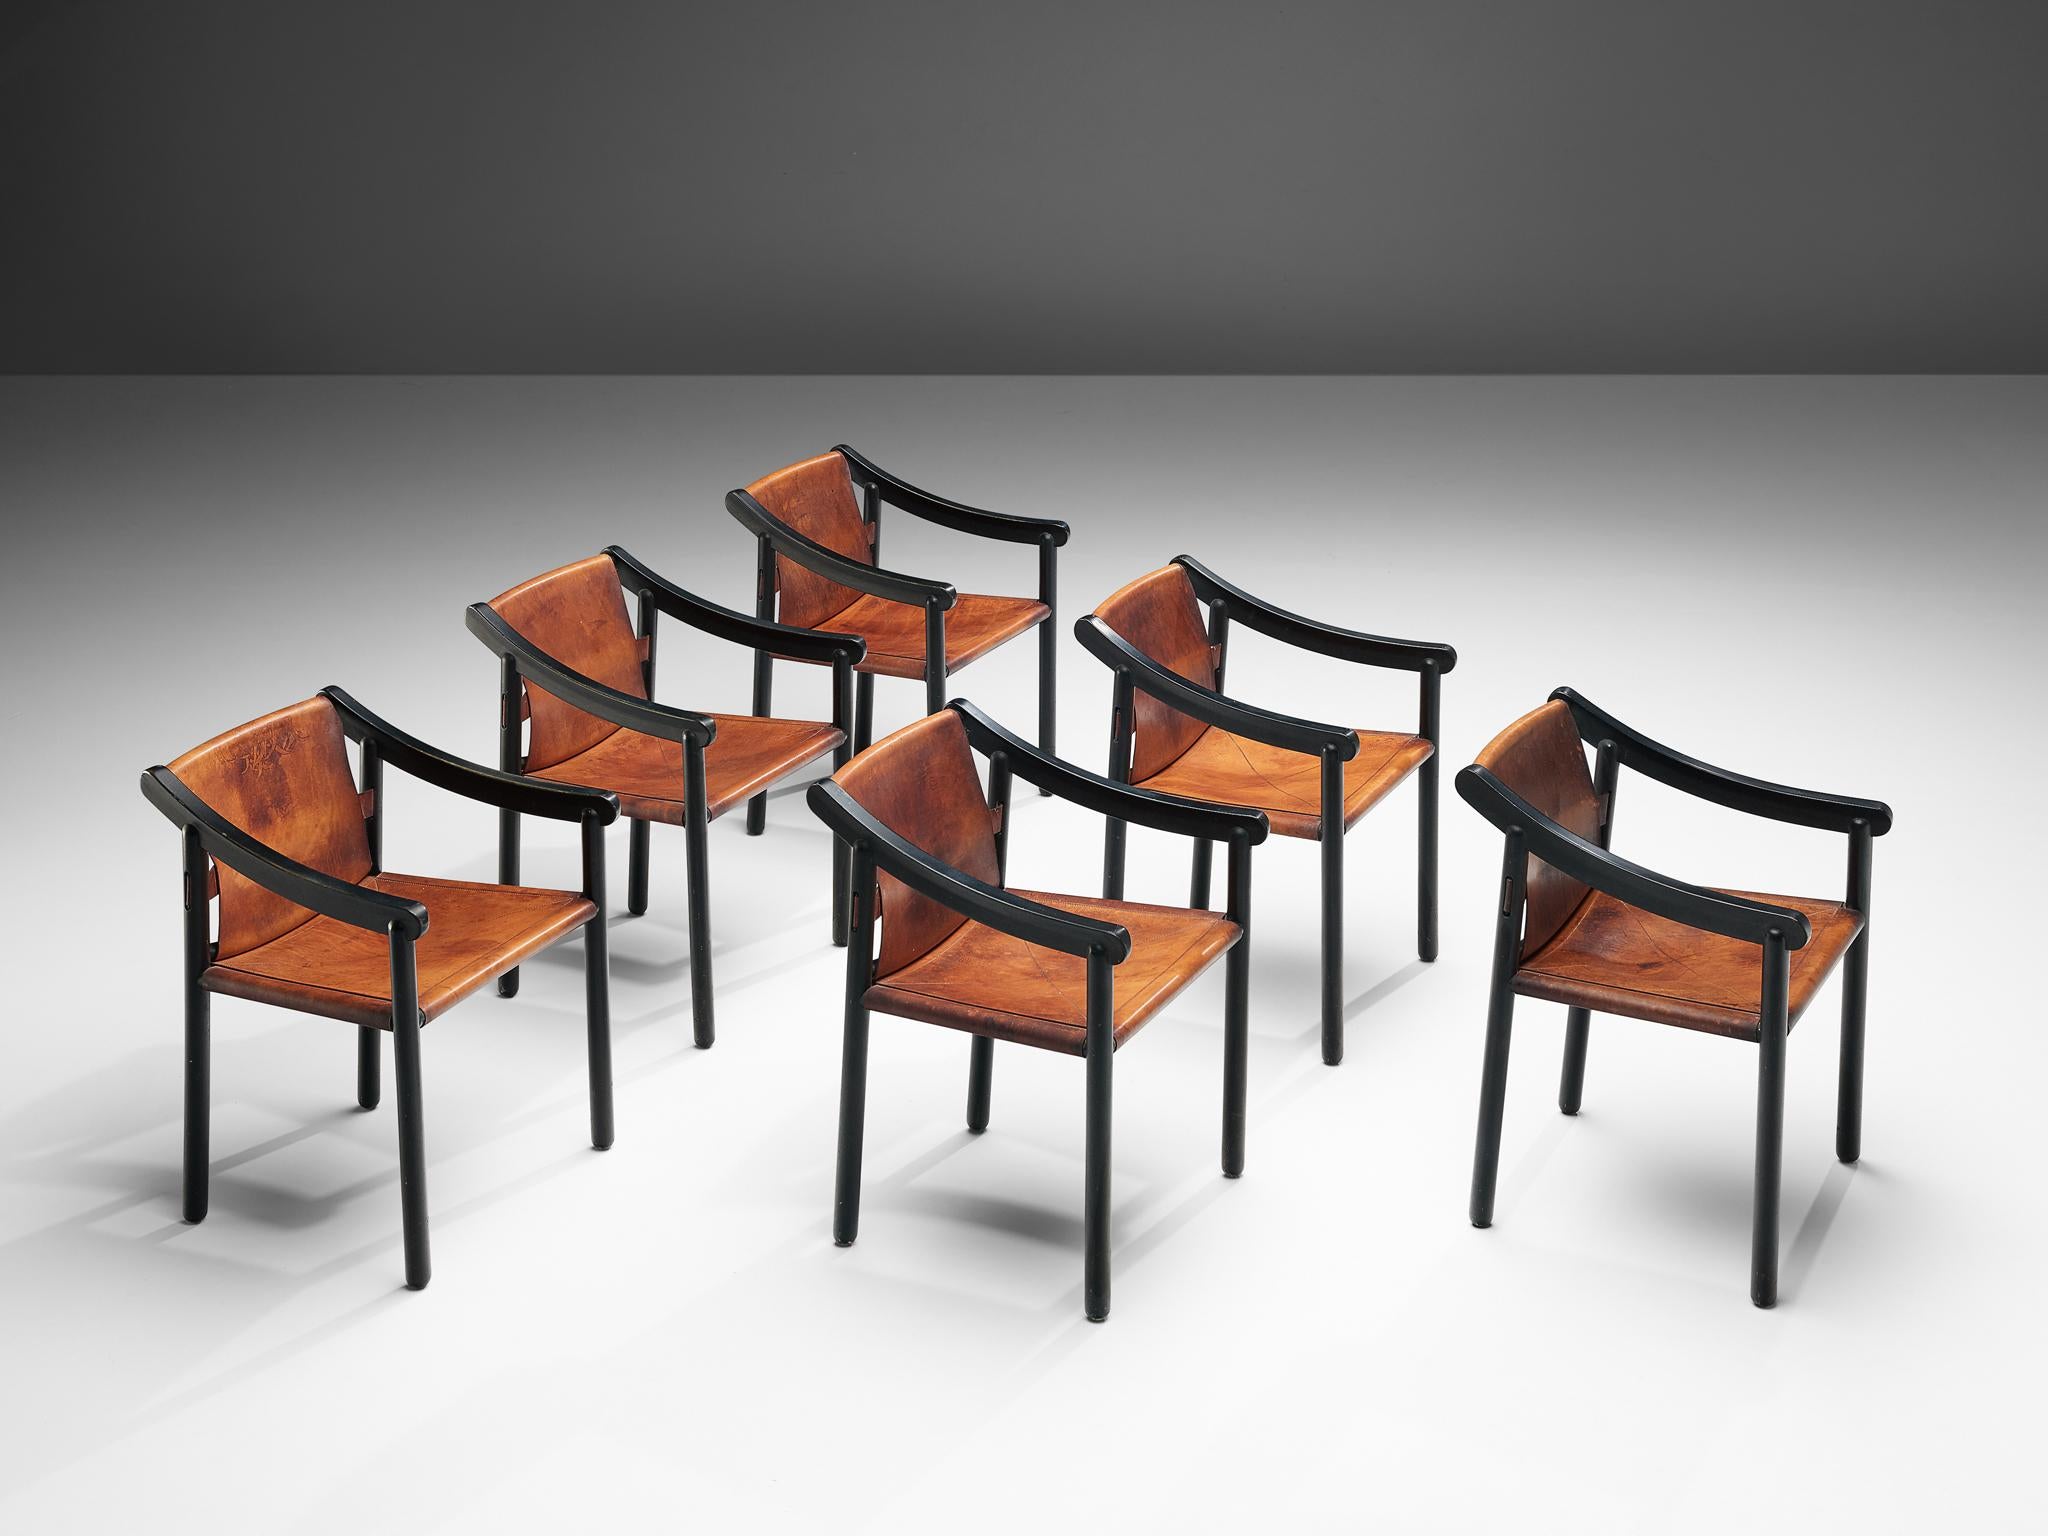 Vico Magistretti for Cassina, set of six '905' armchairs, black lacquered wood and cognac leather, Italy, 1964.

Designed by Vico Magistretti and produced by Cassina, this set of chairs features the original elements of this early '905' model. The